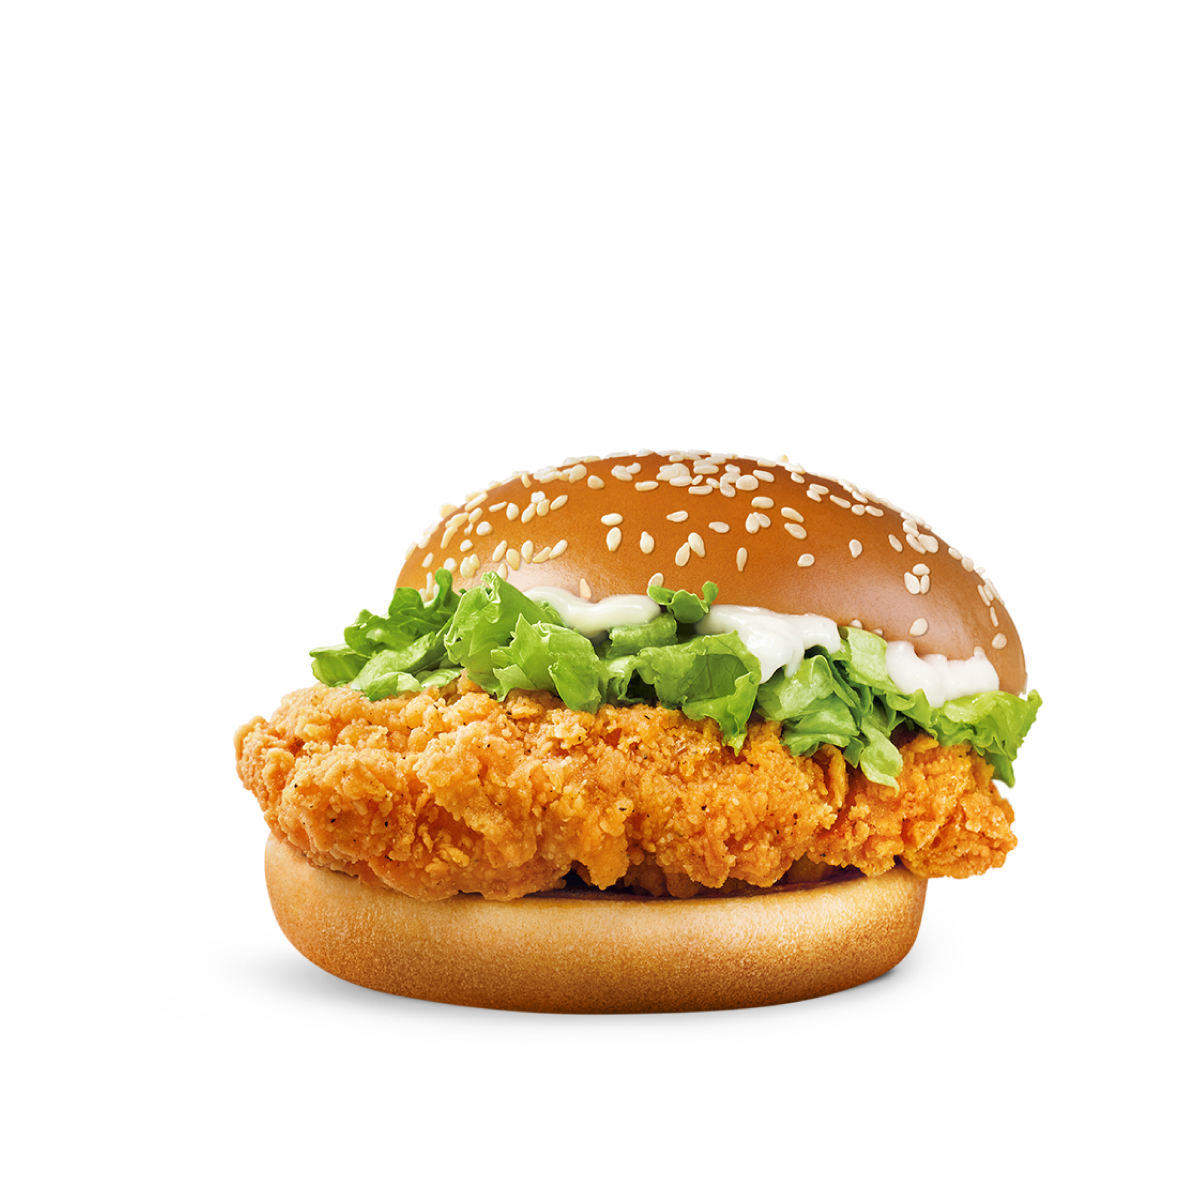 McSpicy in Singapore